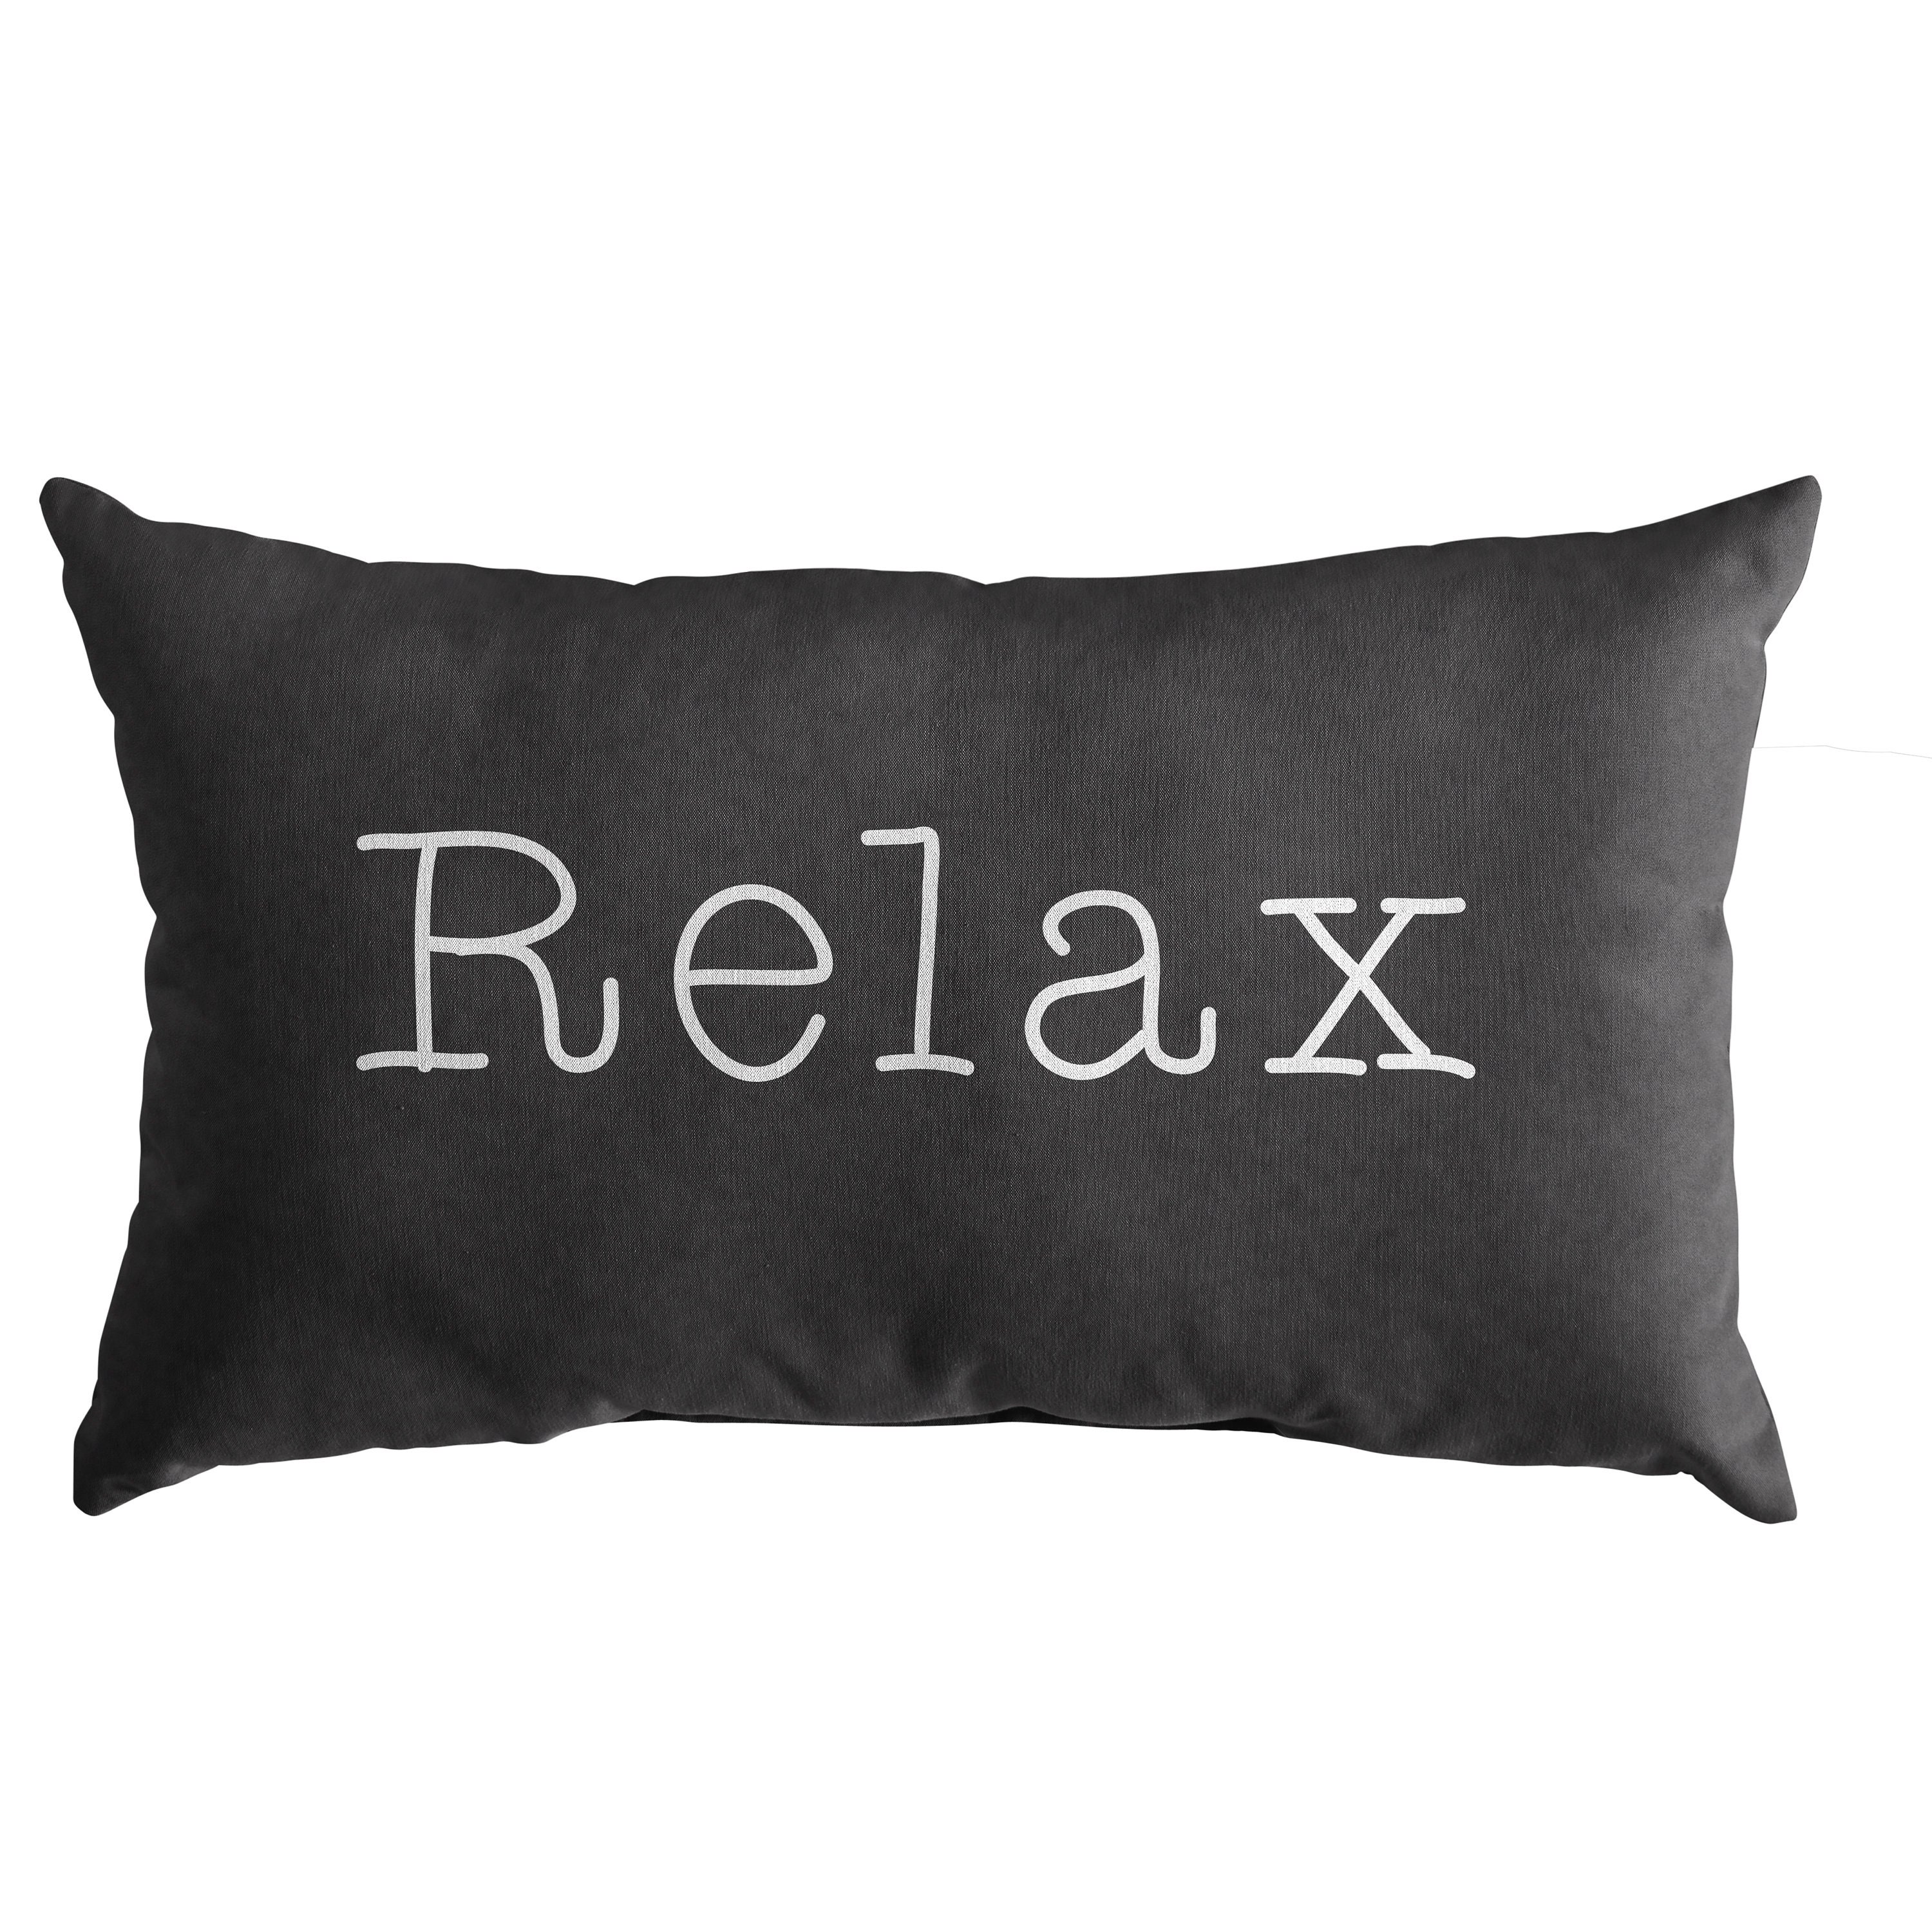 Relax, Rest, Be Blessed - Small Throw Pillow